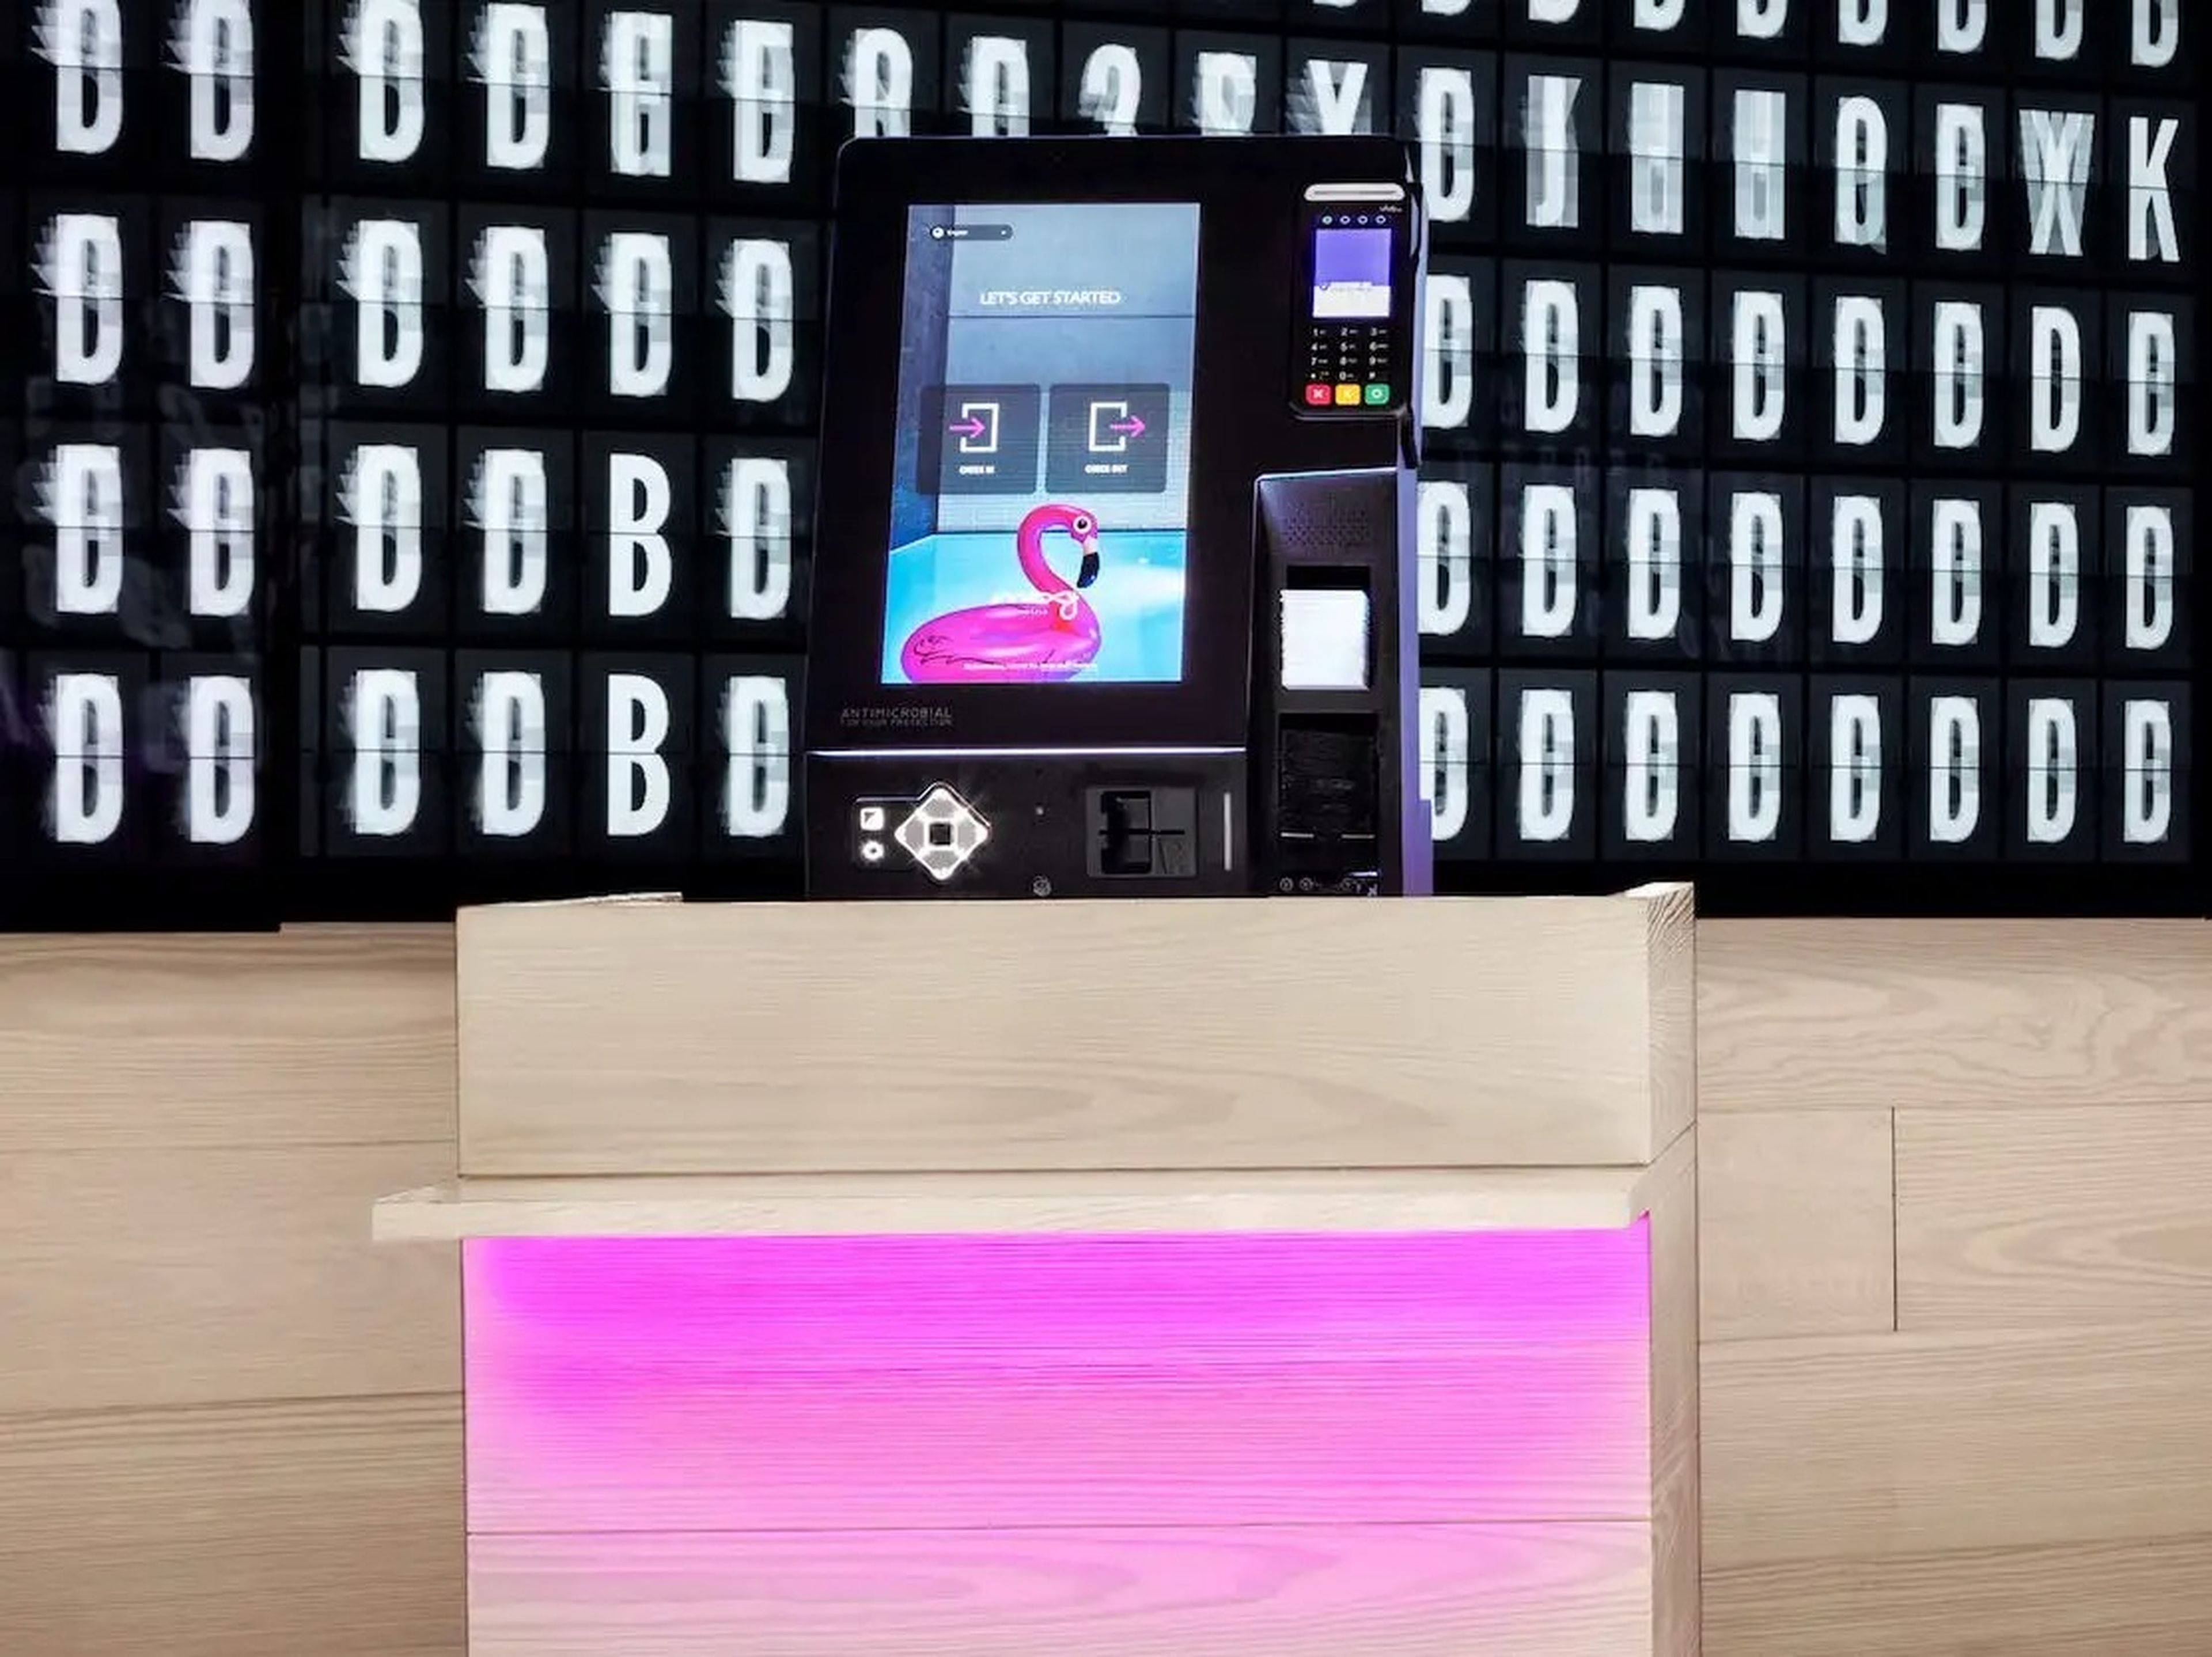 Moxy NYC Times Sq_Contactless_Kiosk_01 credit Marriott International